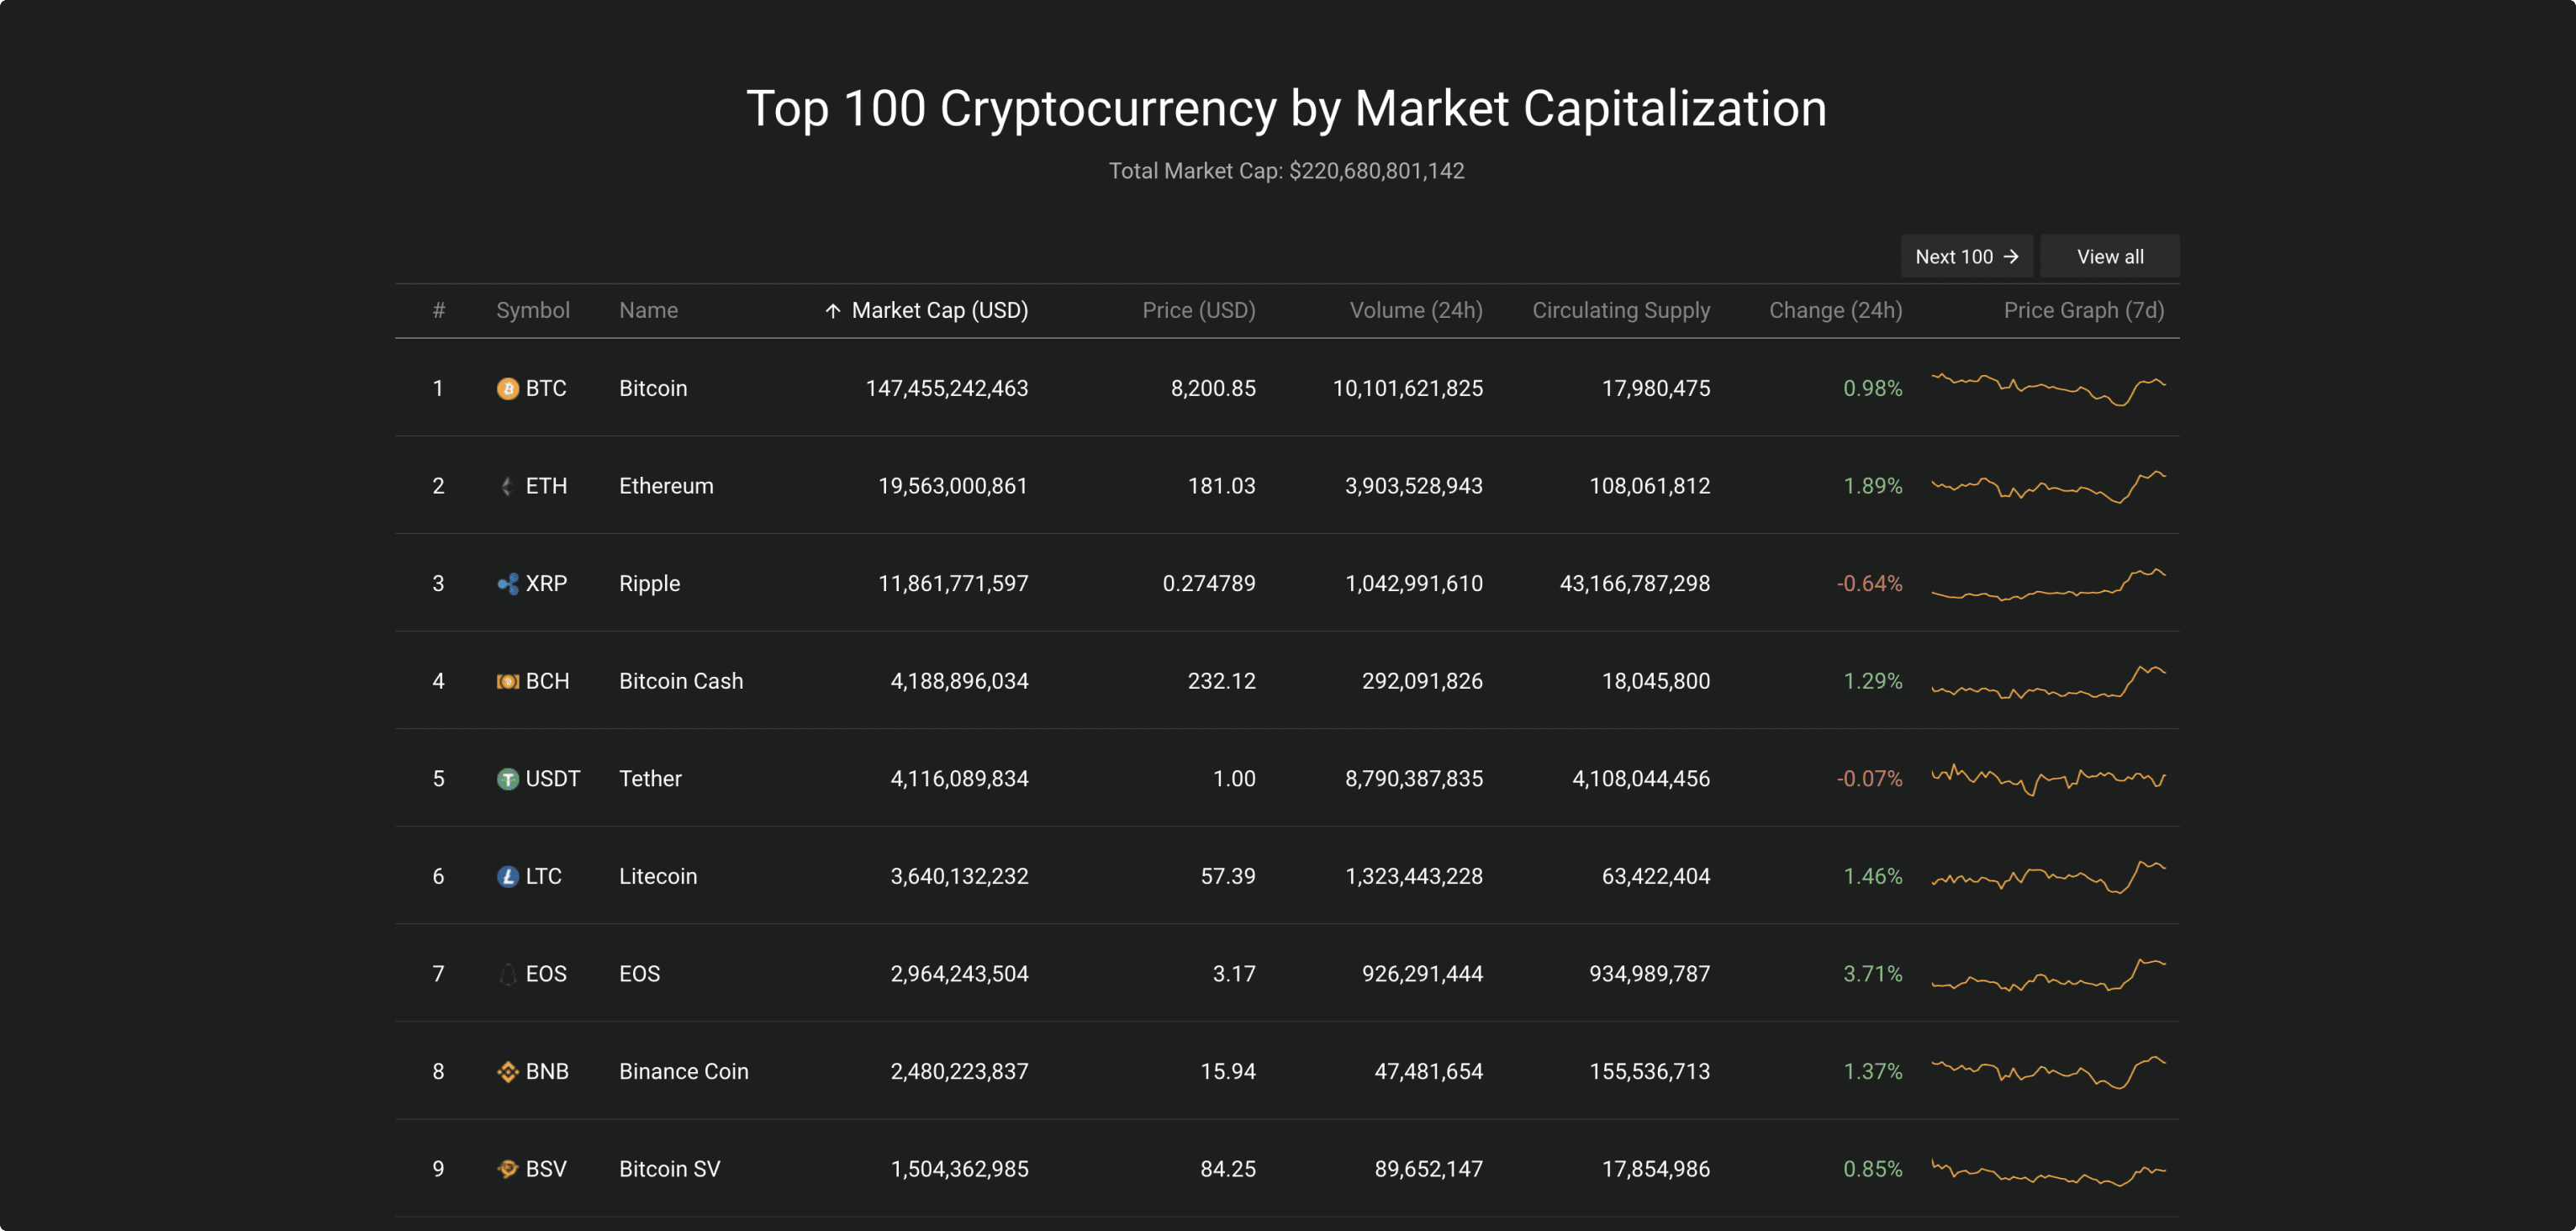 Total crypto market cap for top 100 cryptocurrencies